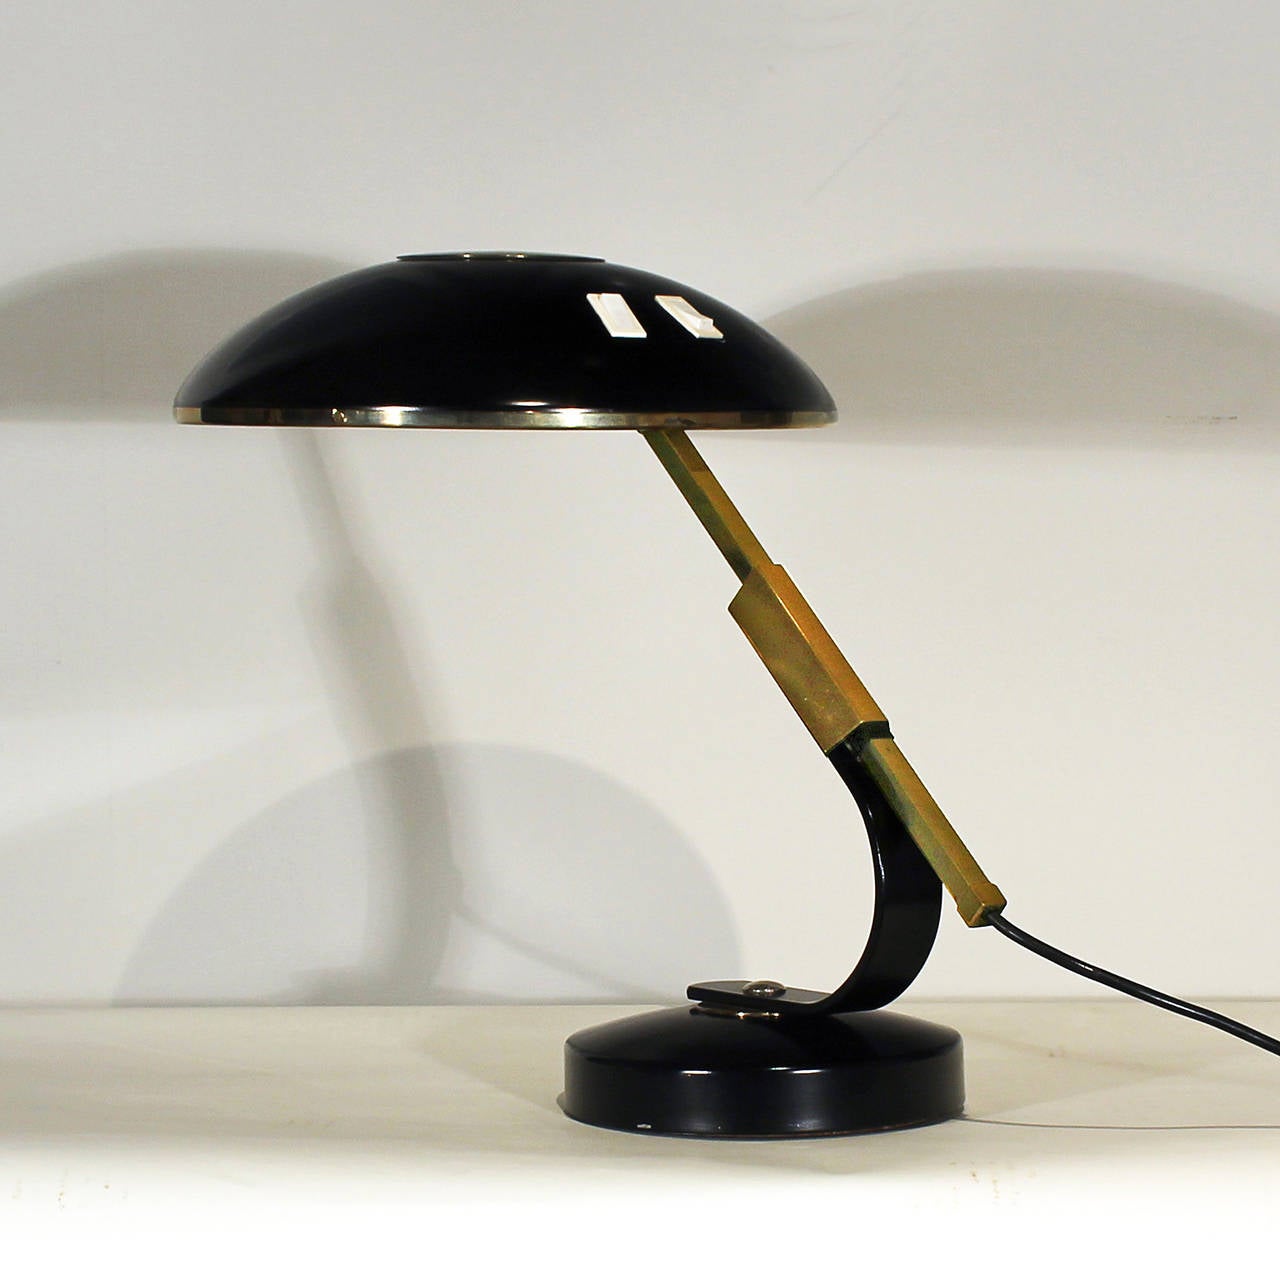 Desk lamp with sliding system, brass and black lacquered sheet metal, double switch.
Brand: Ferdinand Solère
France c. 1950

Max. height: 54 cm
Max. width: 74 cm